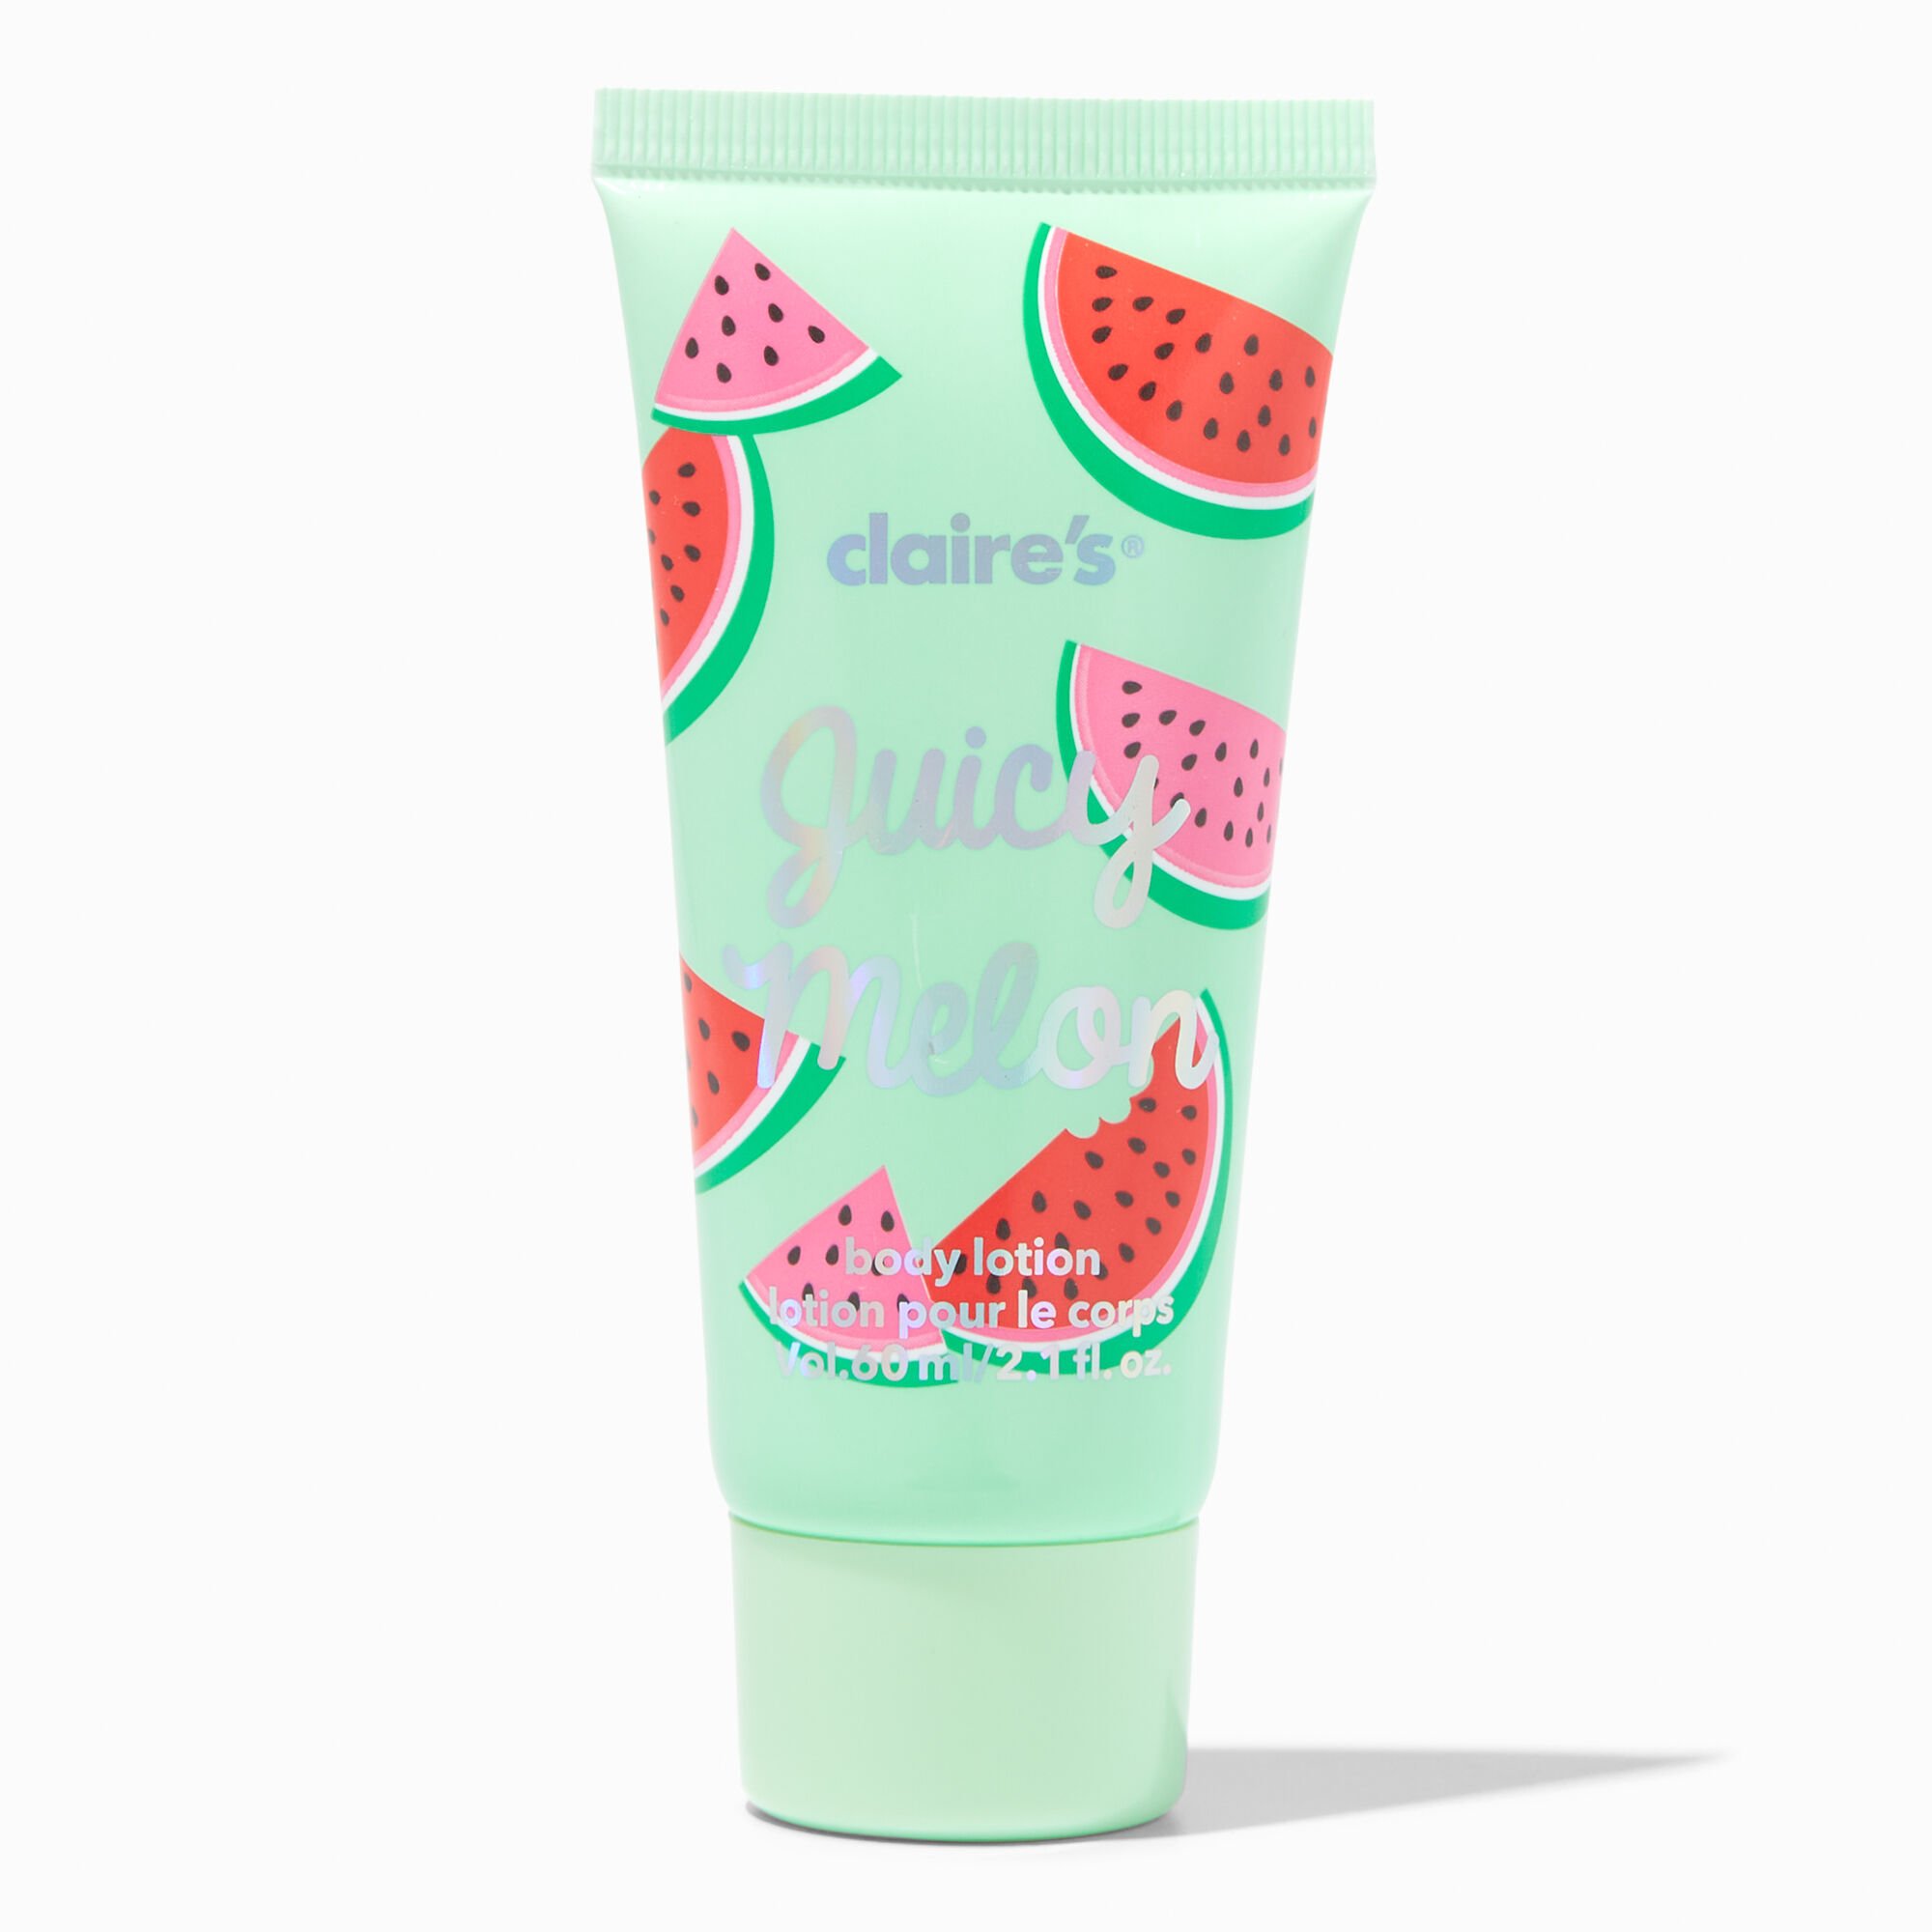 View Claires Juicy Melon Body Lotion information